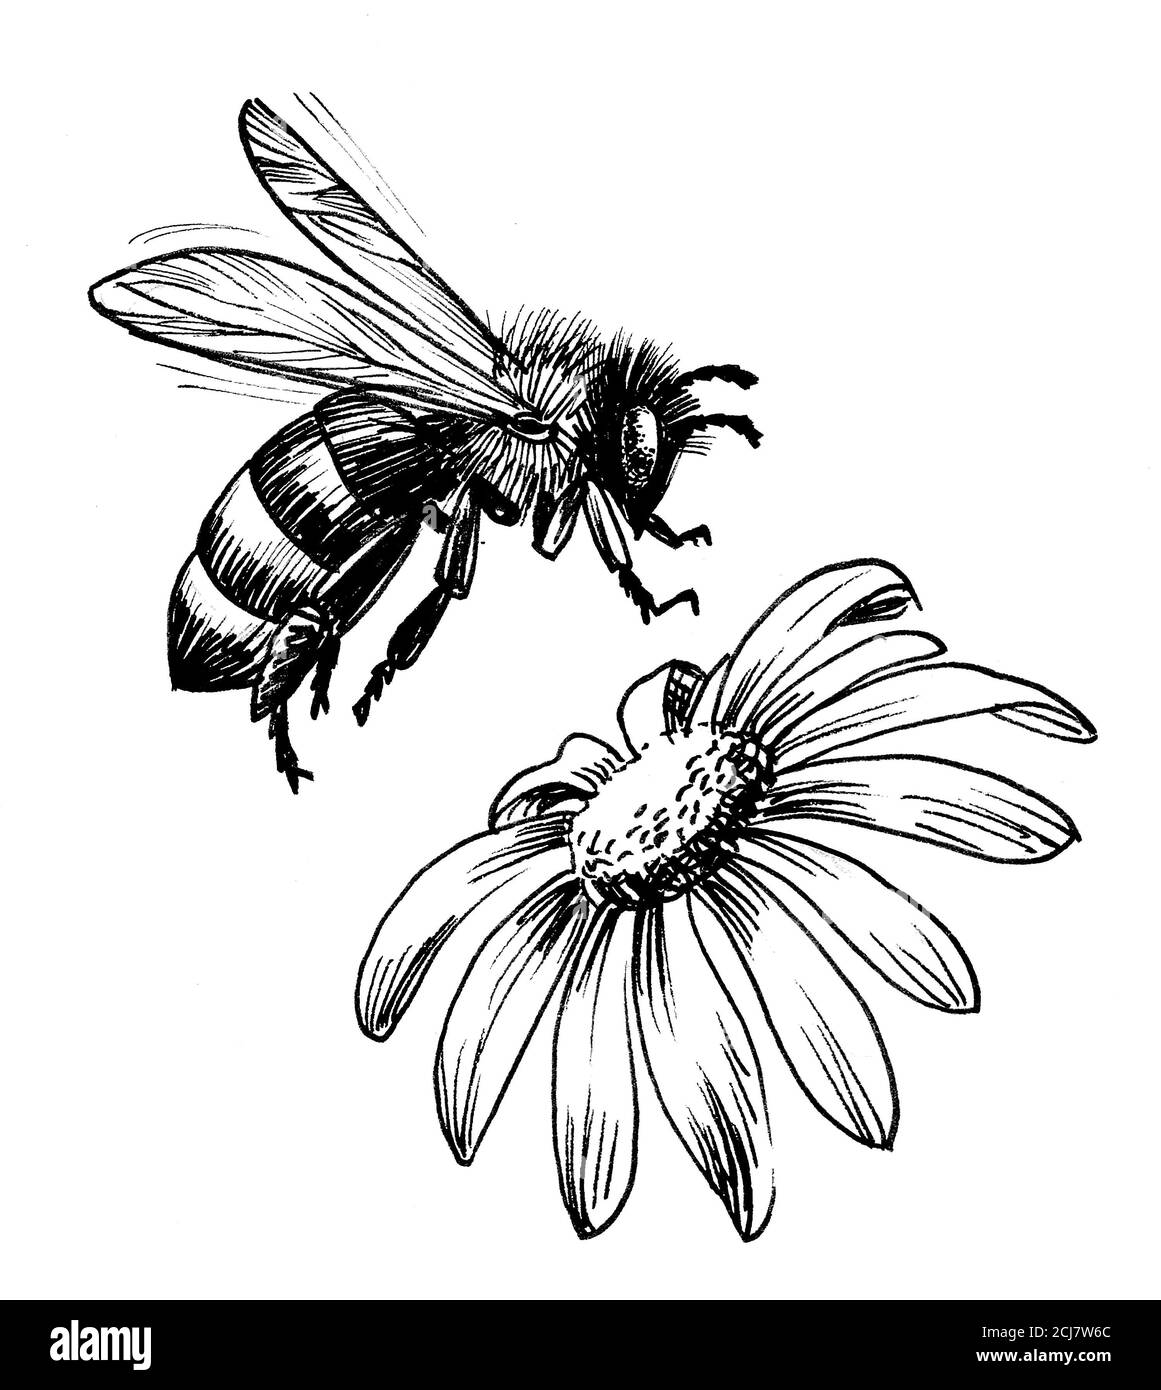 Flying bee and flower. Ink black and white illustration Stock Photo - Alamy